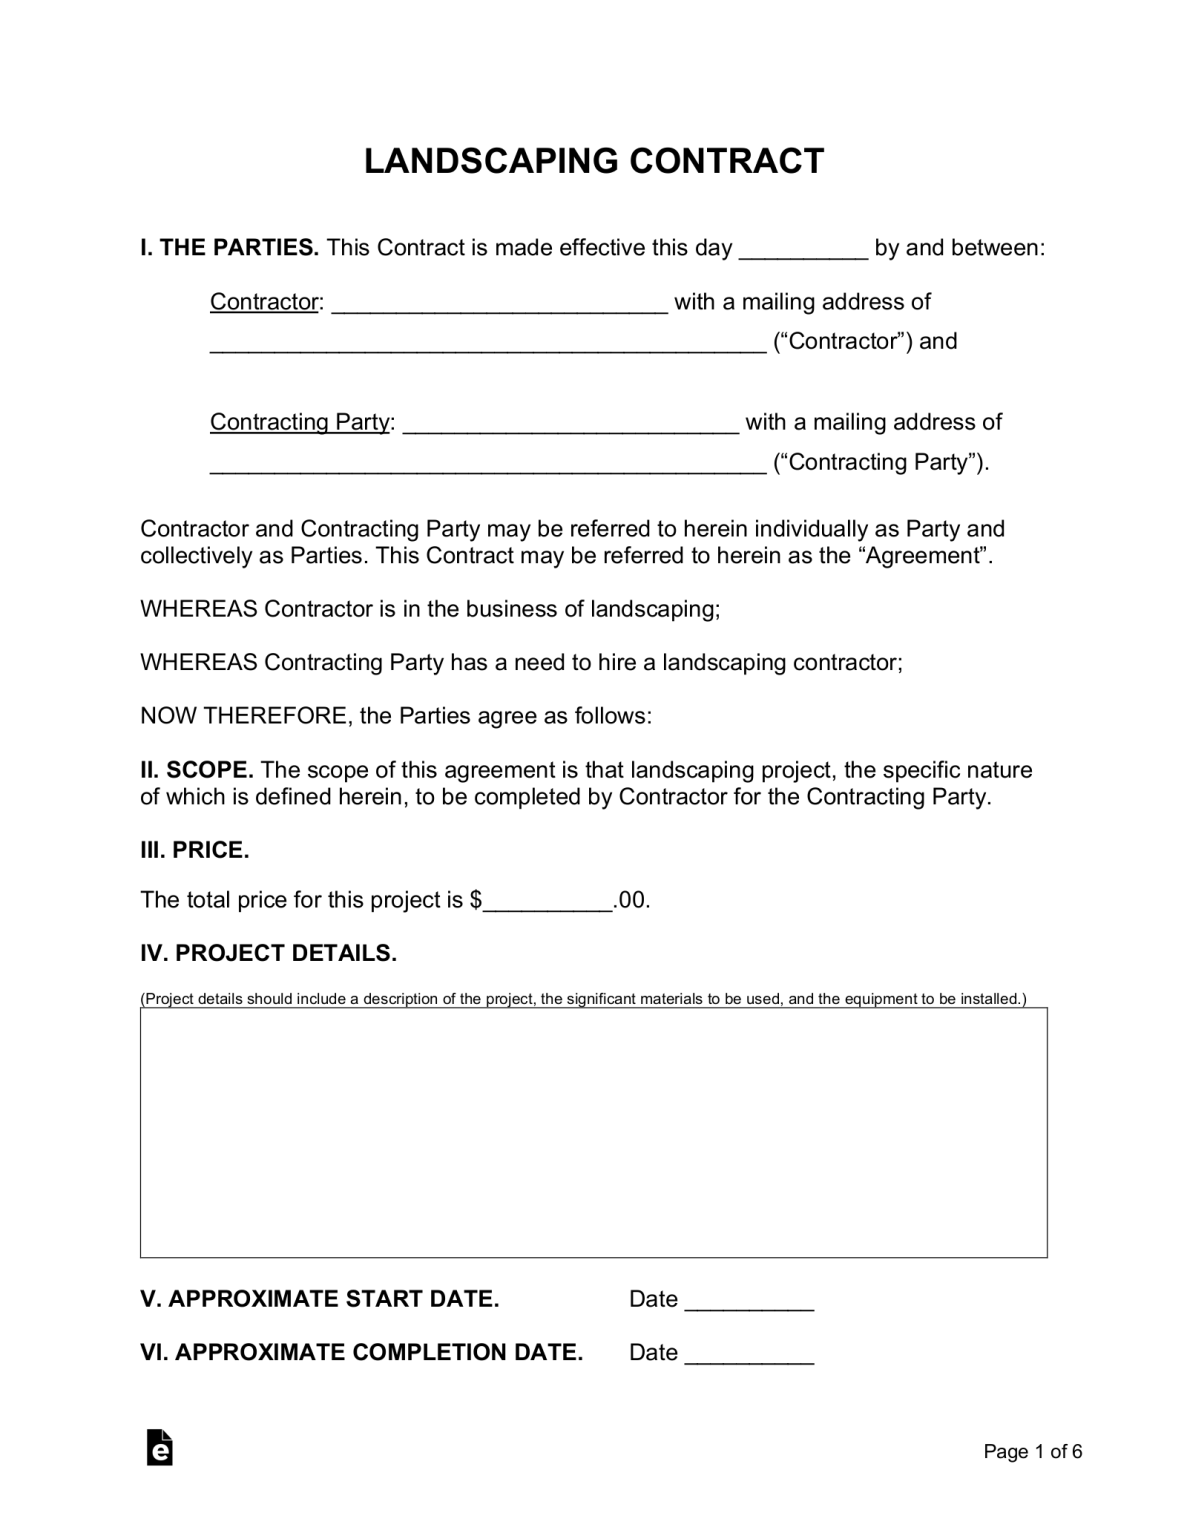 free-landscaping-contract-template-pdf-word-eforms